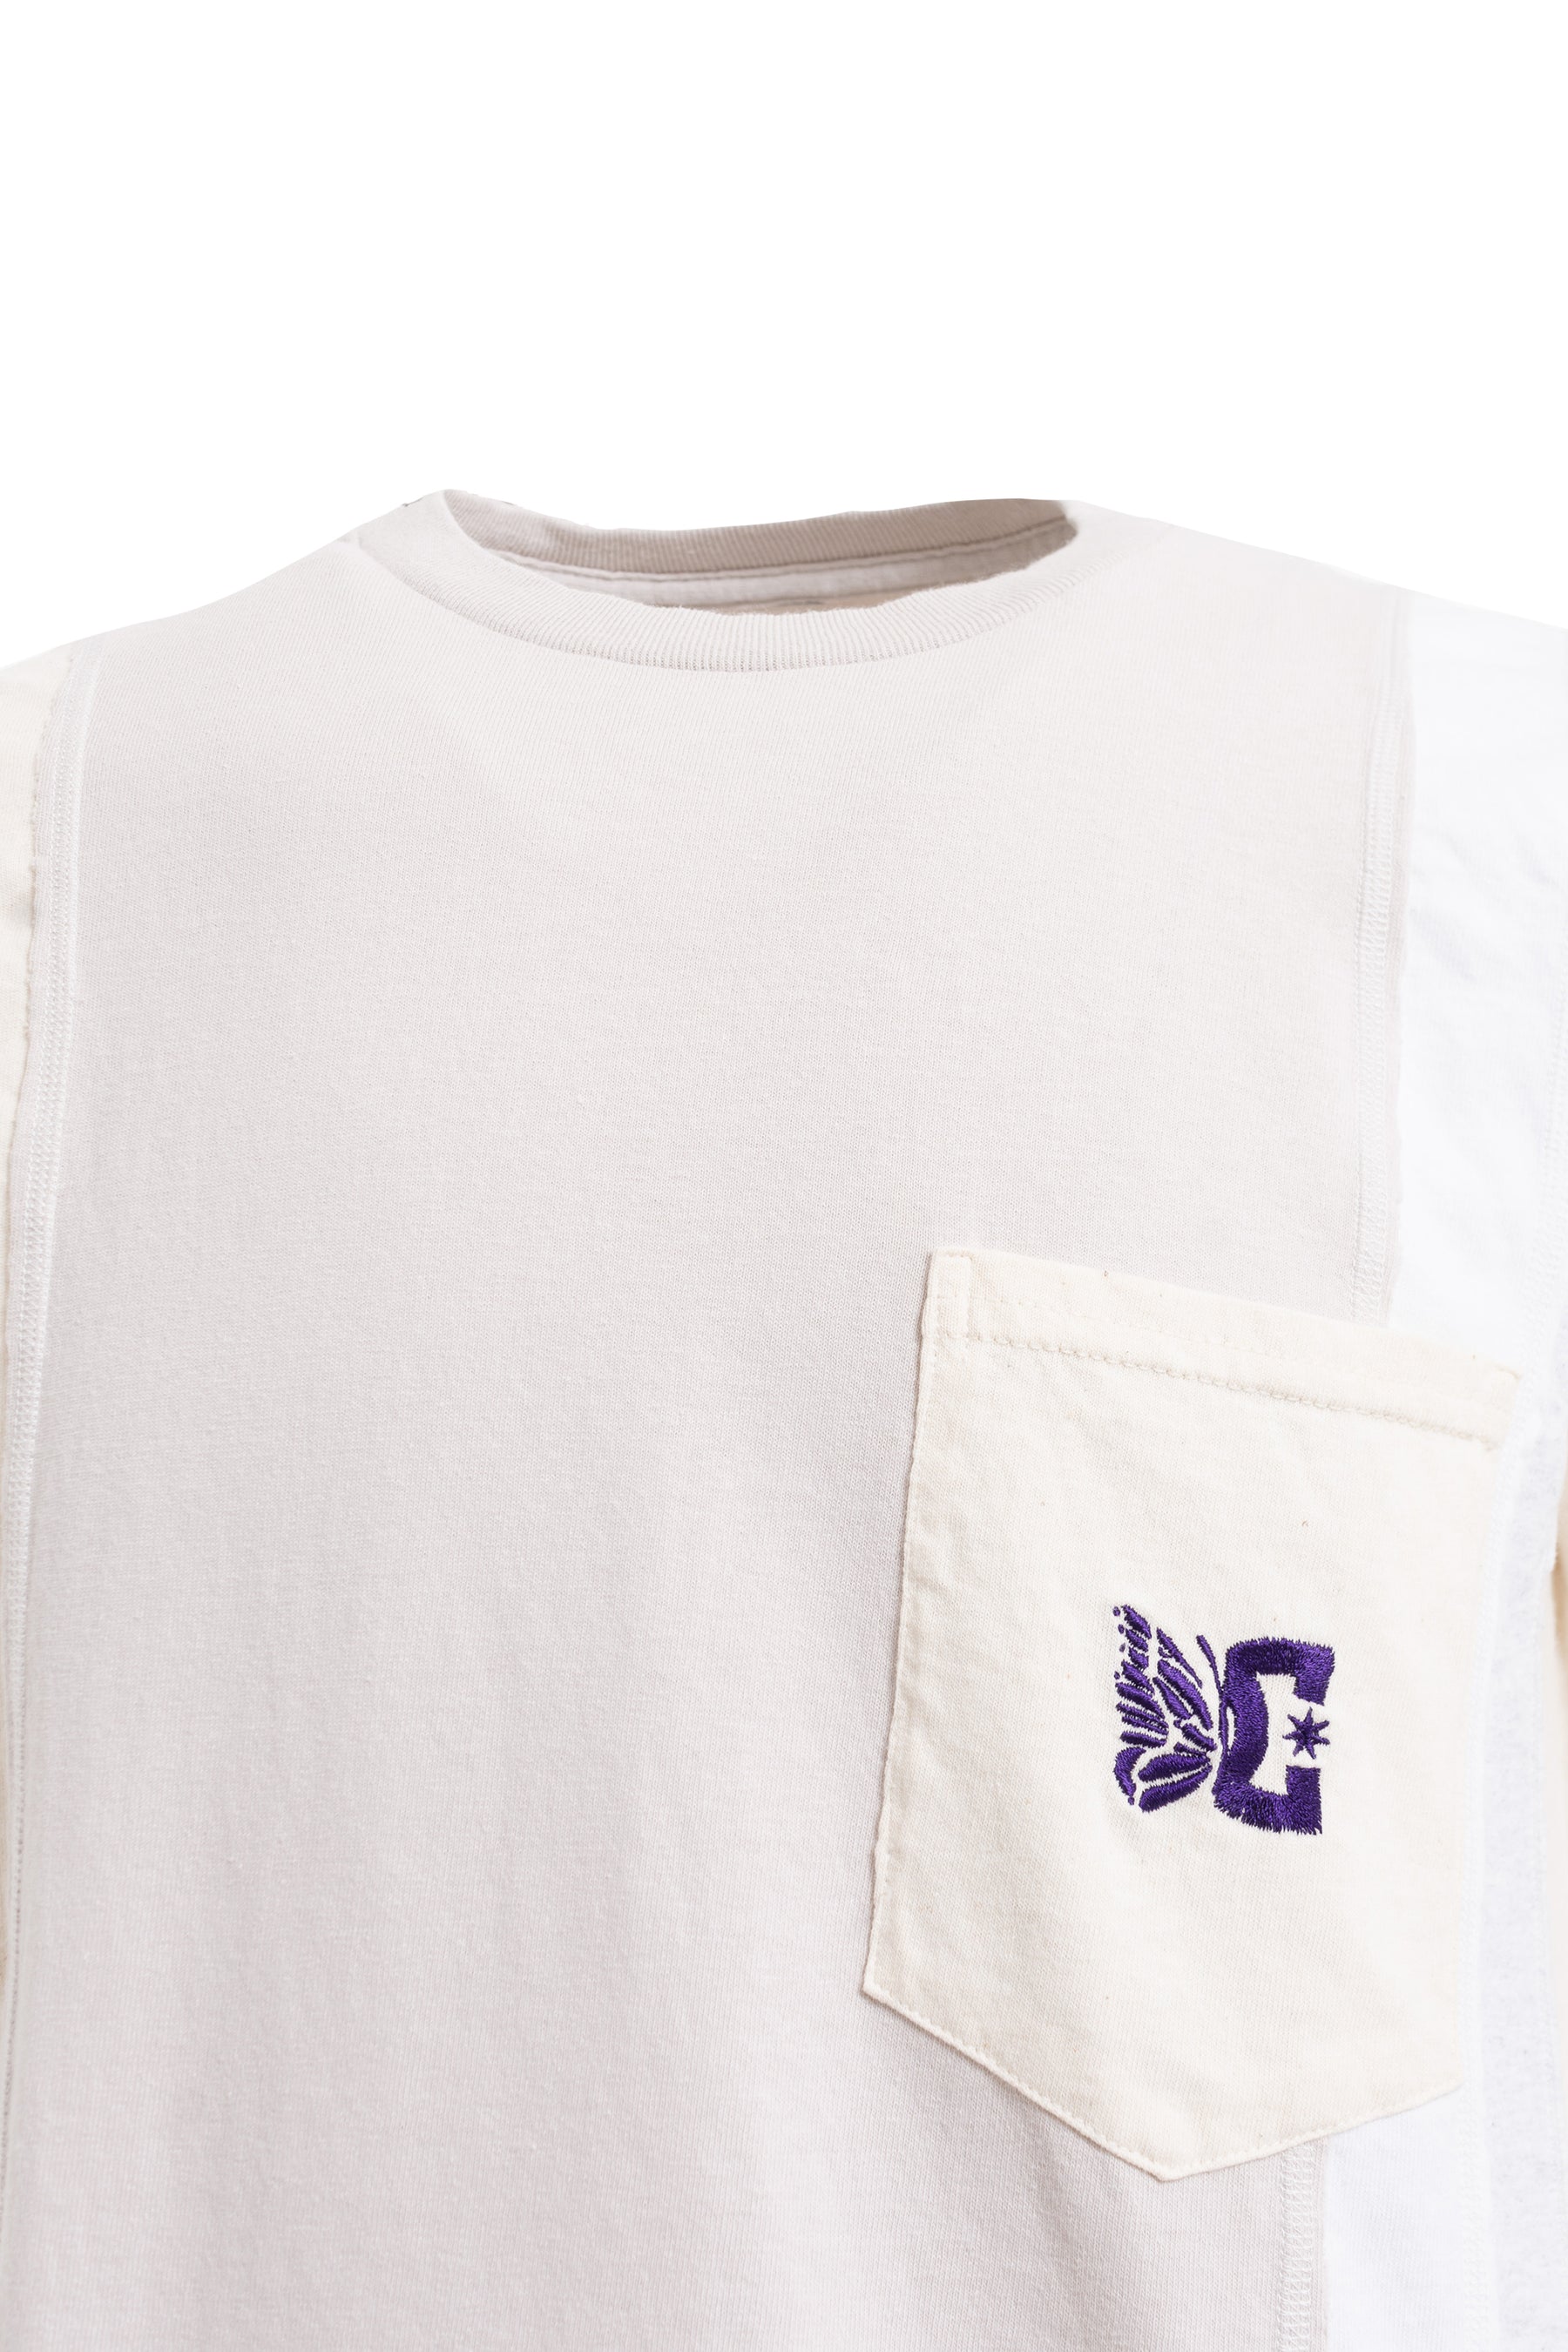 7 CUTS S/S TEE - SOLID / FADE / IVORY / XS